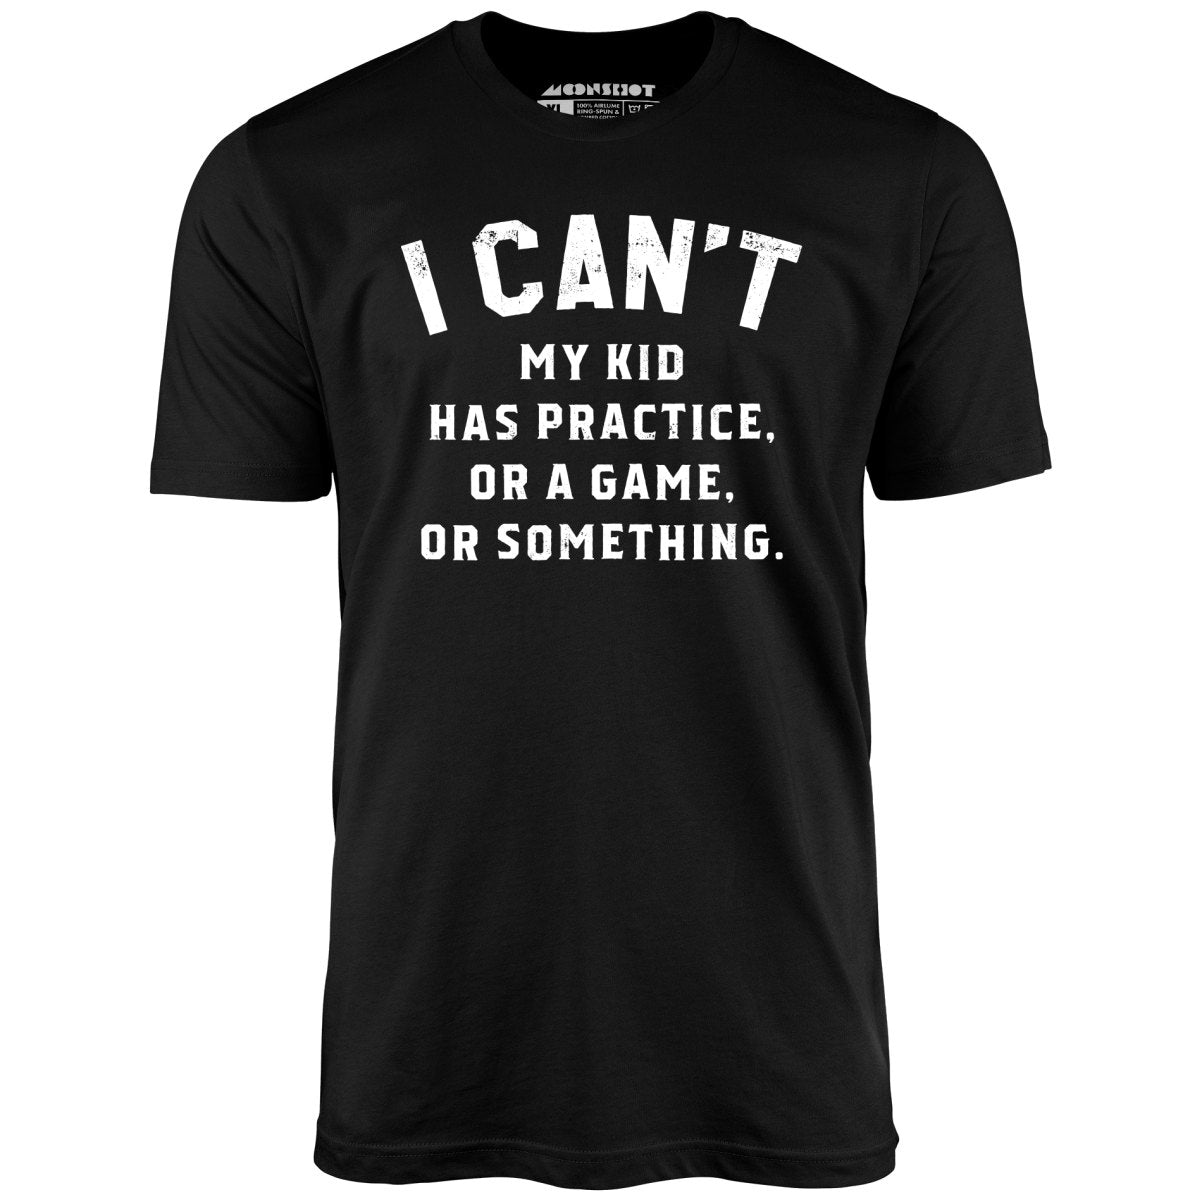 I Can't - Unisex T-Shirt